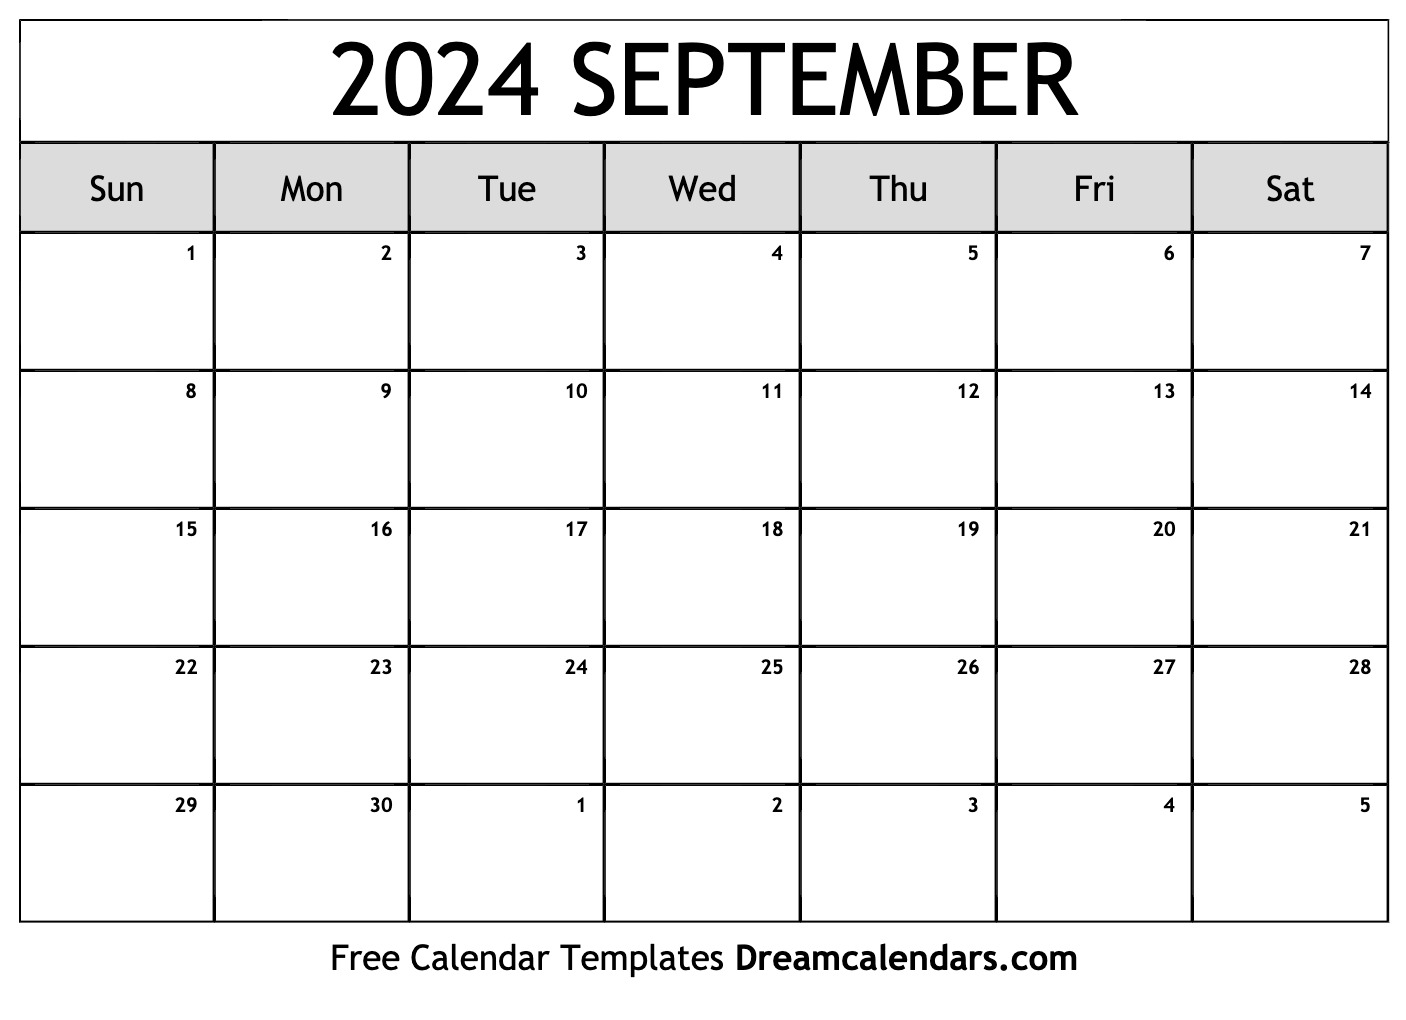 September 2024 Calendar Free Printable with Holidays and Observances